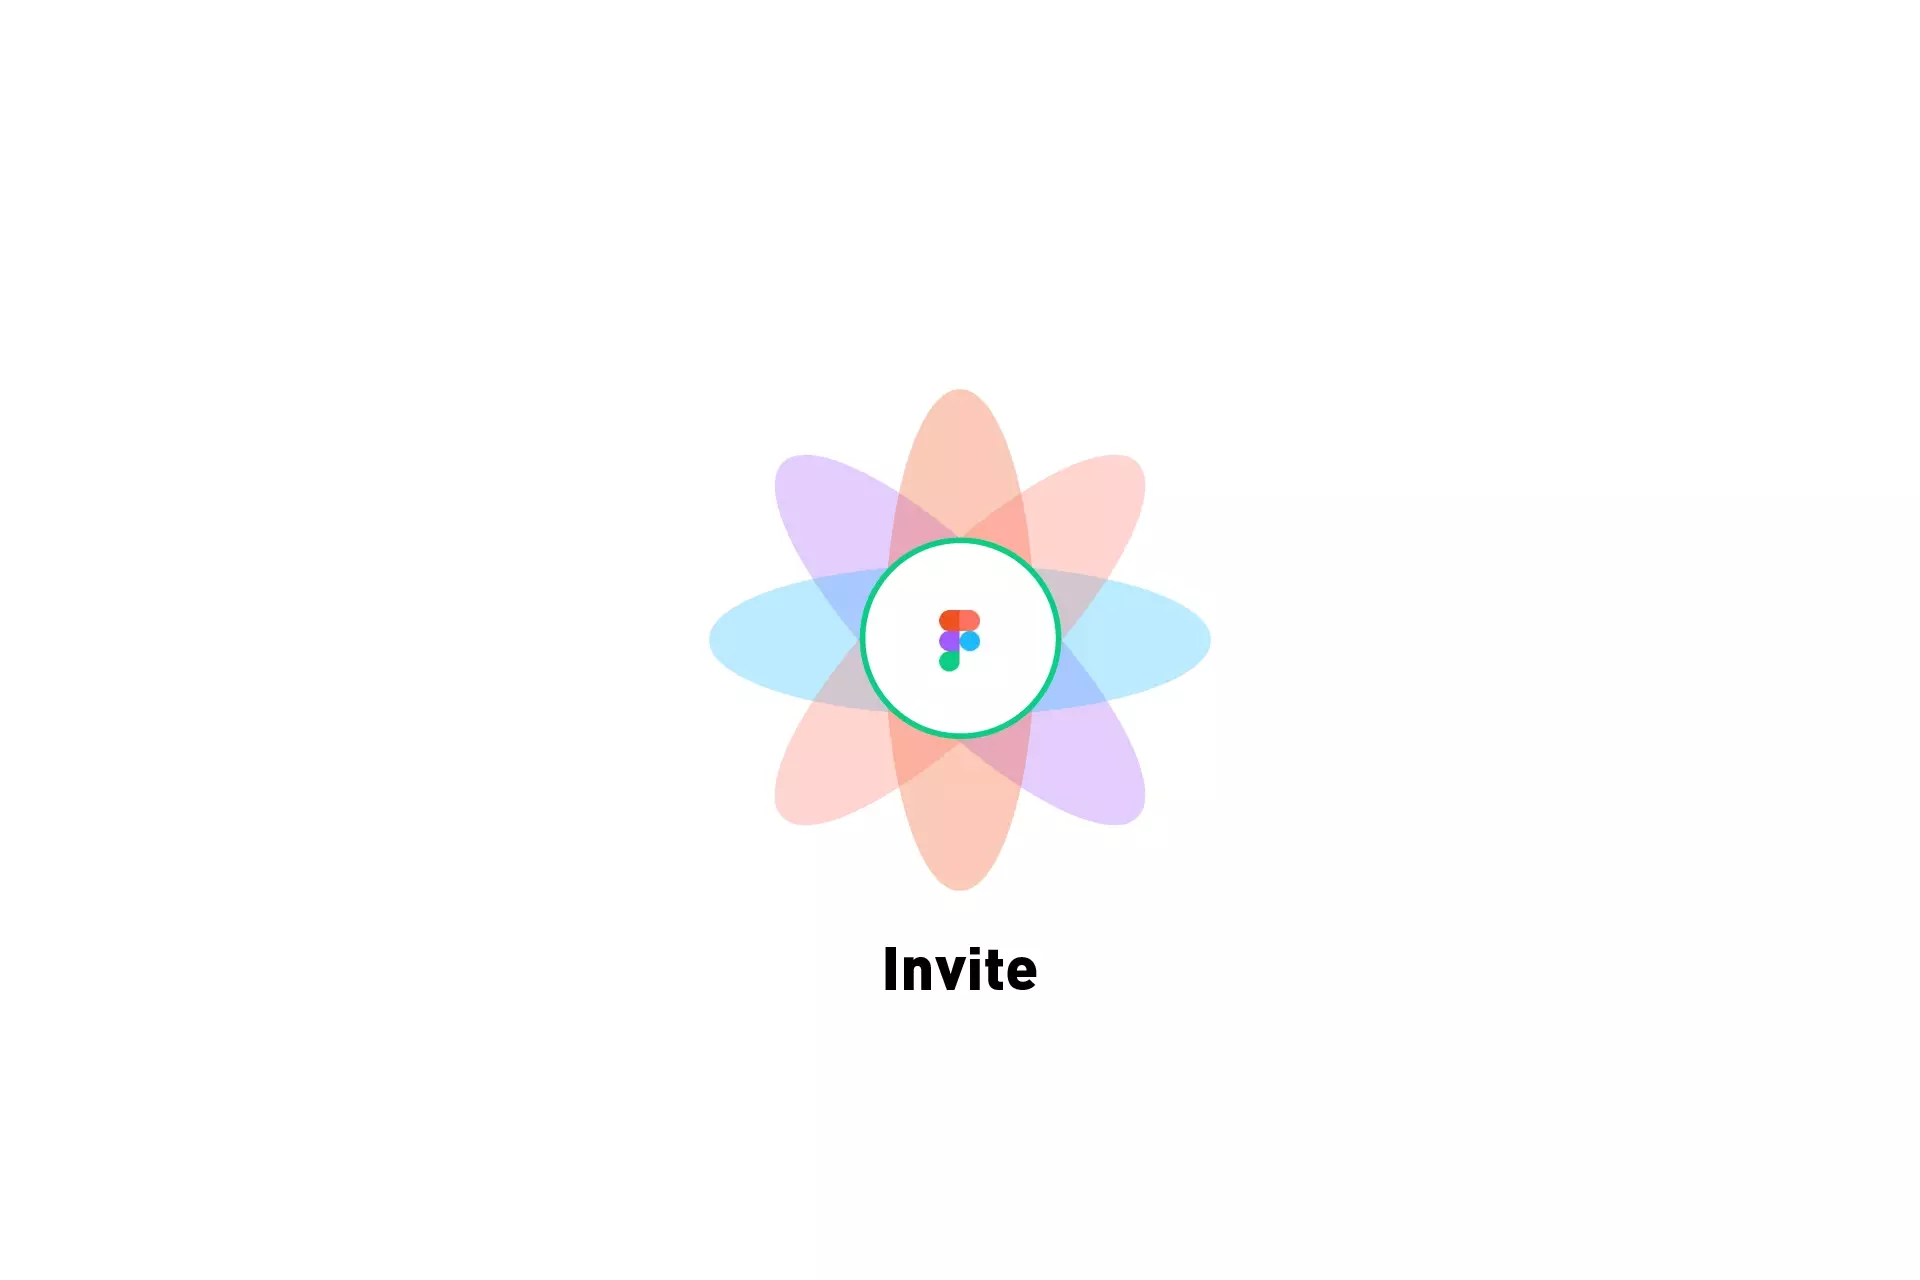 A flower that represents Figma with the text "Invite" beneath it.